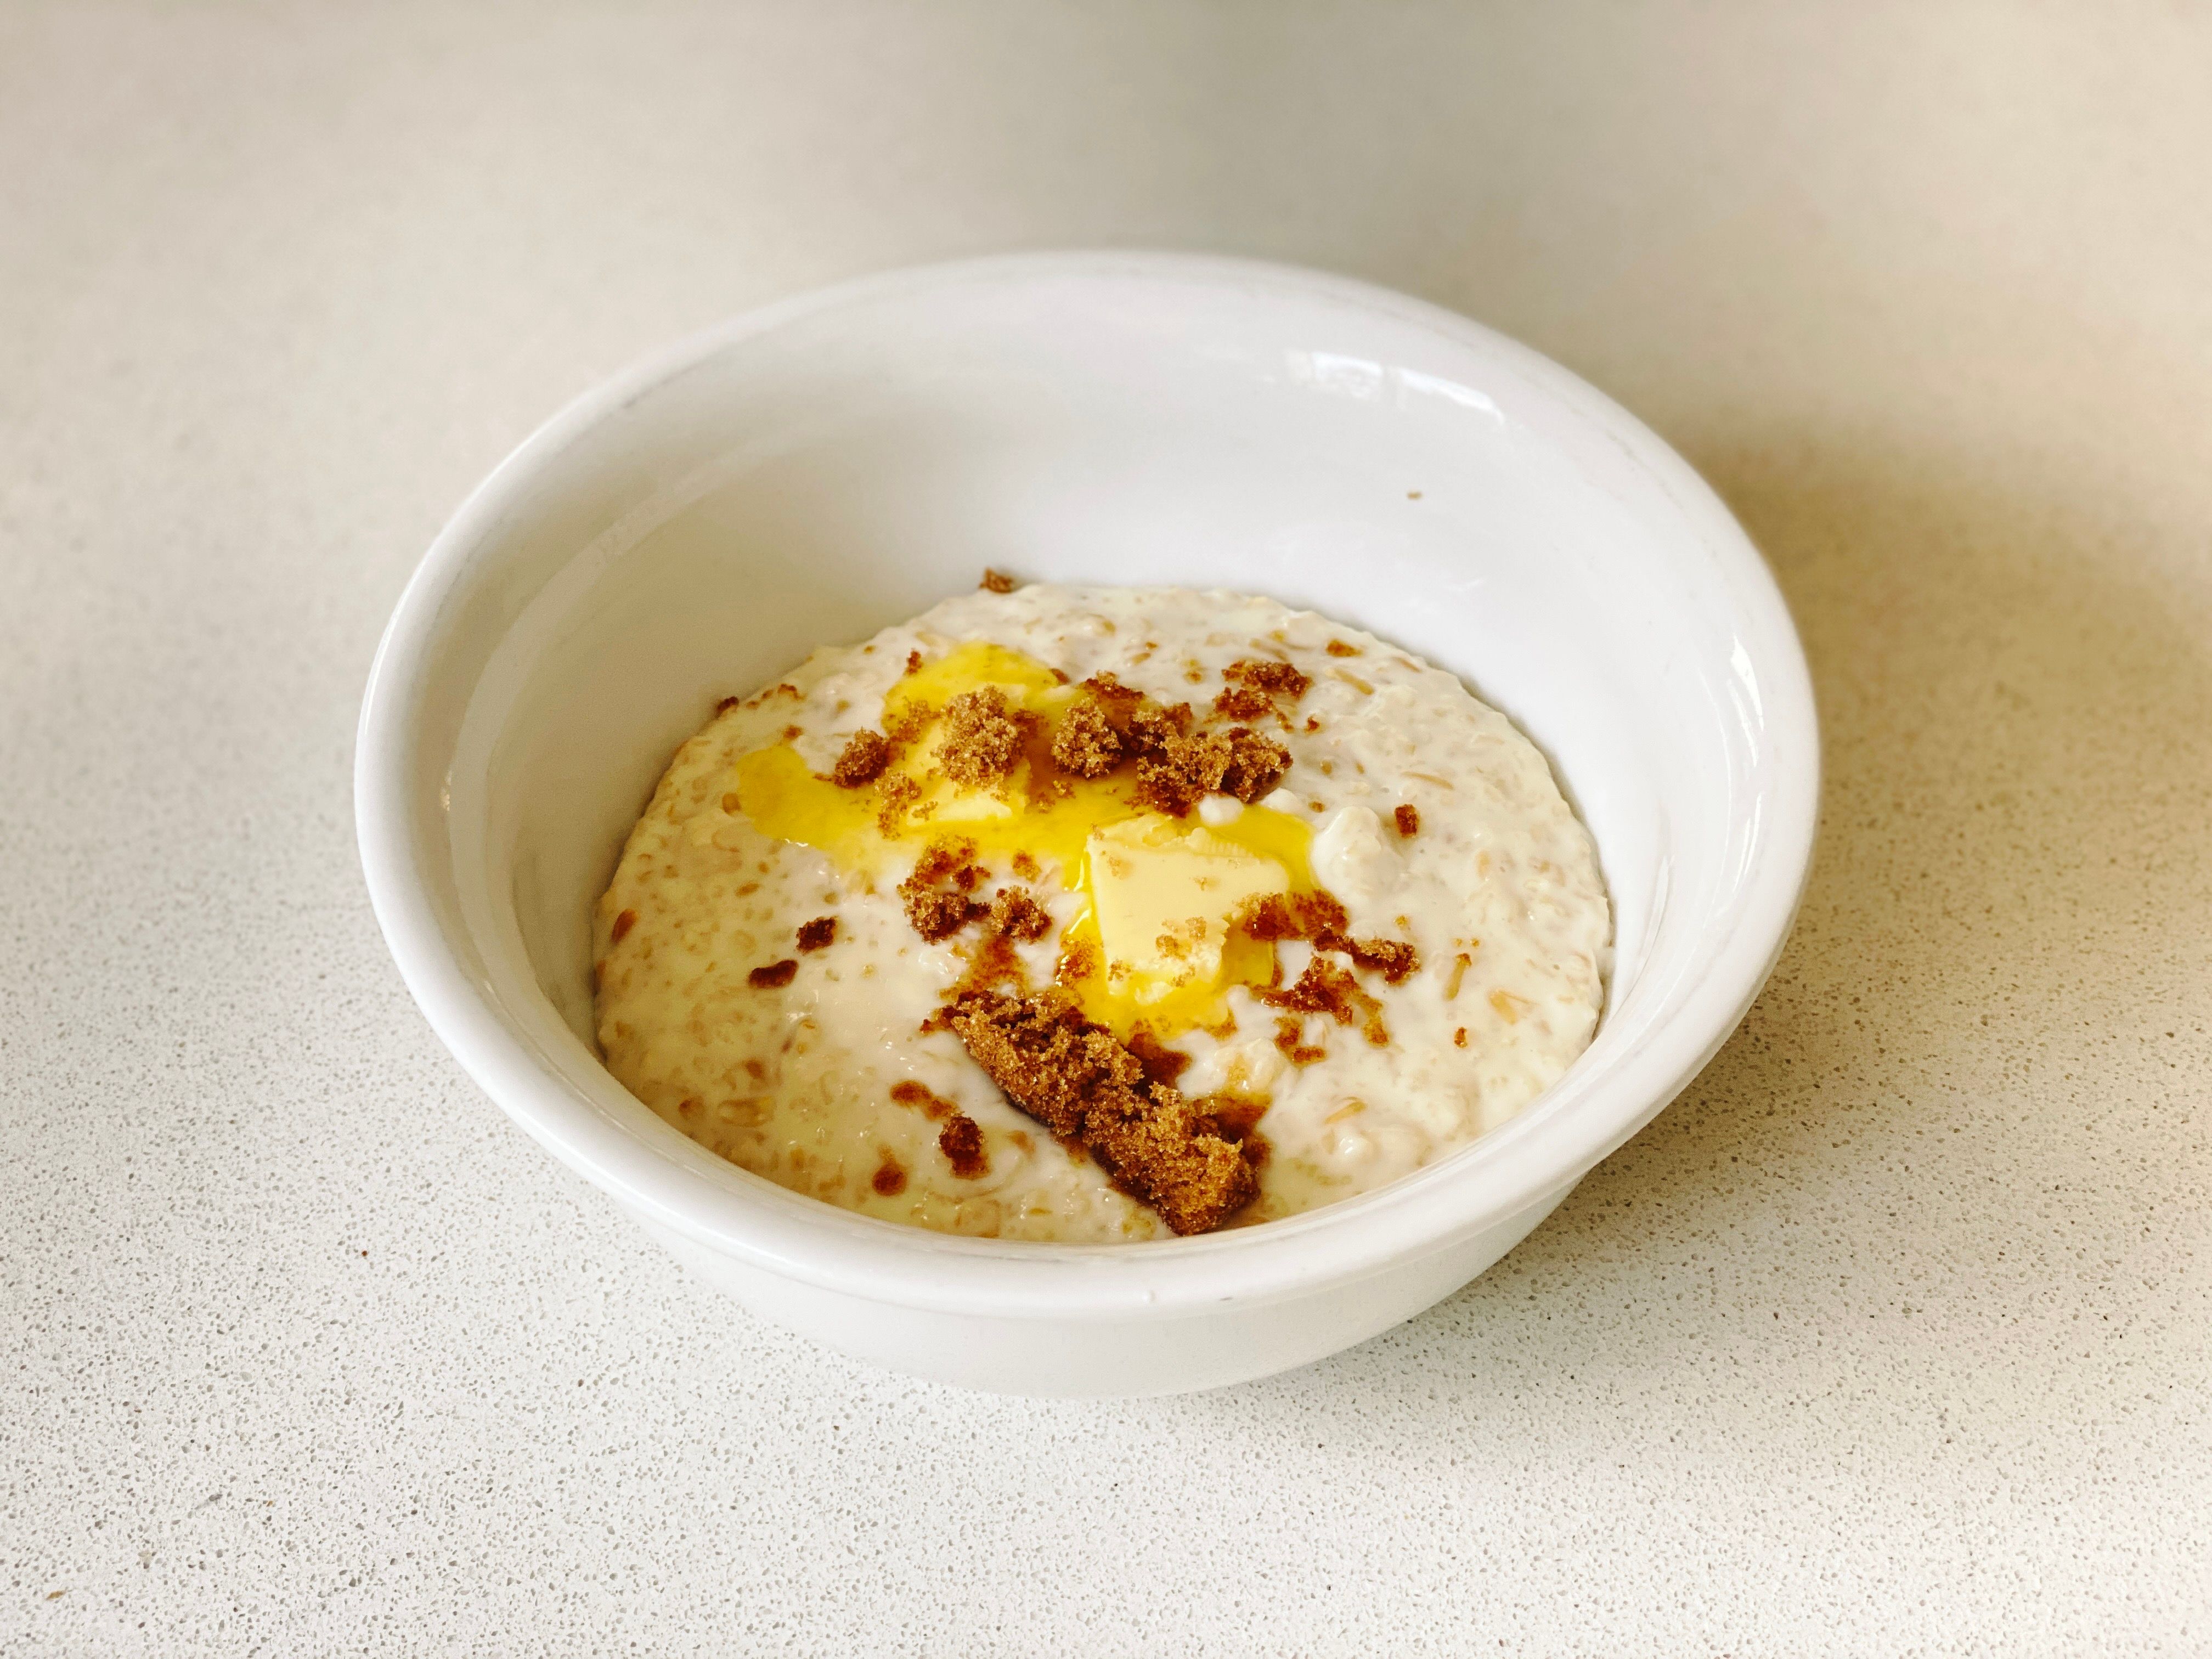 A photo of a bowl of porridge with two slices of butter on top and sprinkled with brown sugar.